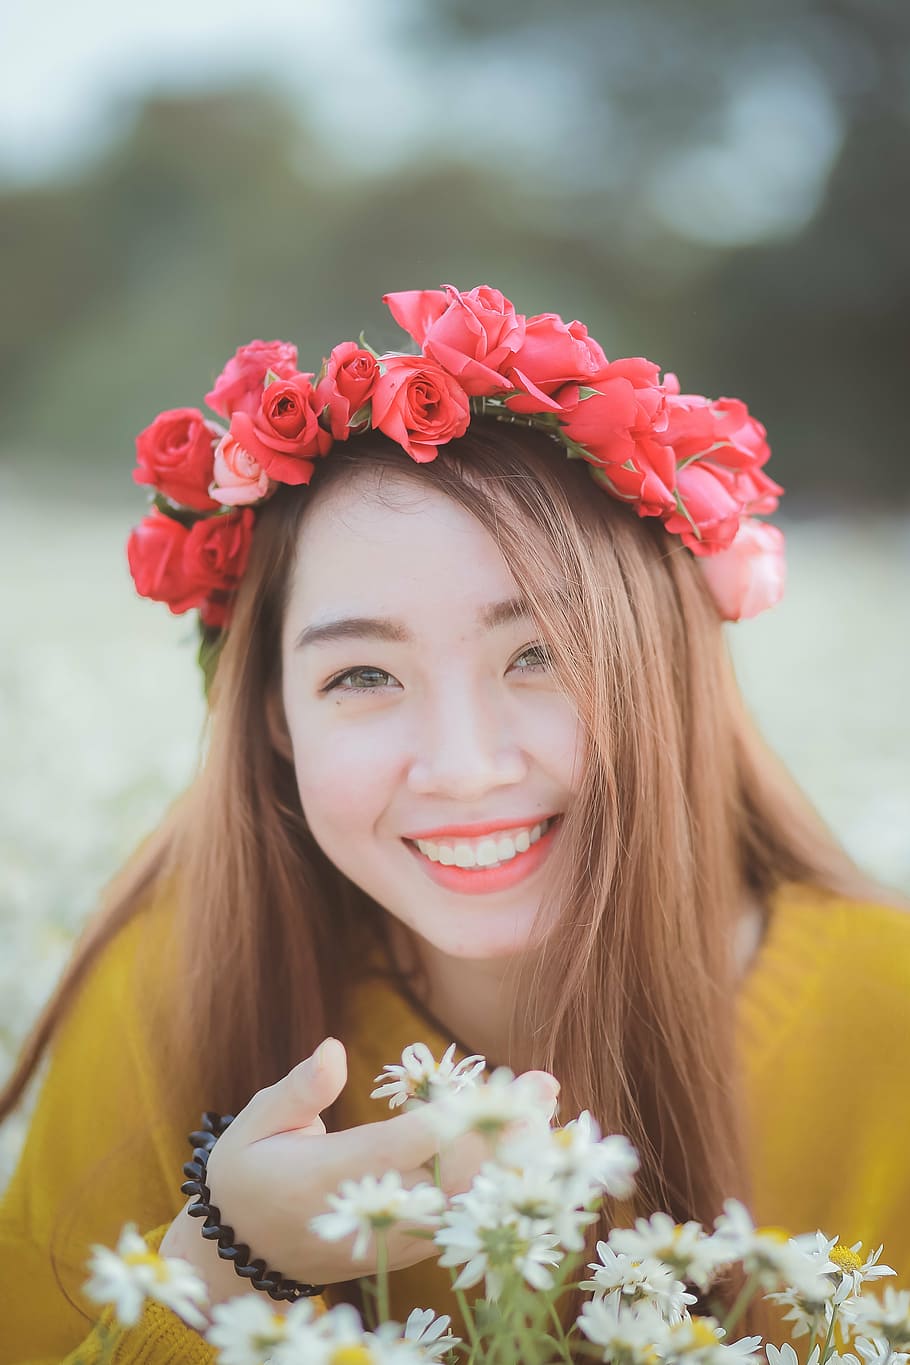 vietnamese, girl, daisy, asia, flower, one woman only, only women, one young woman only, long hair, one person